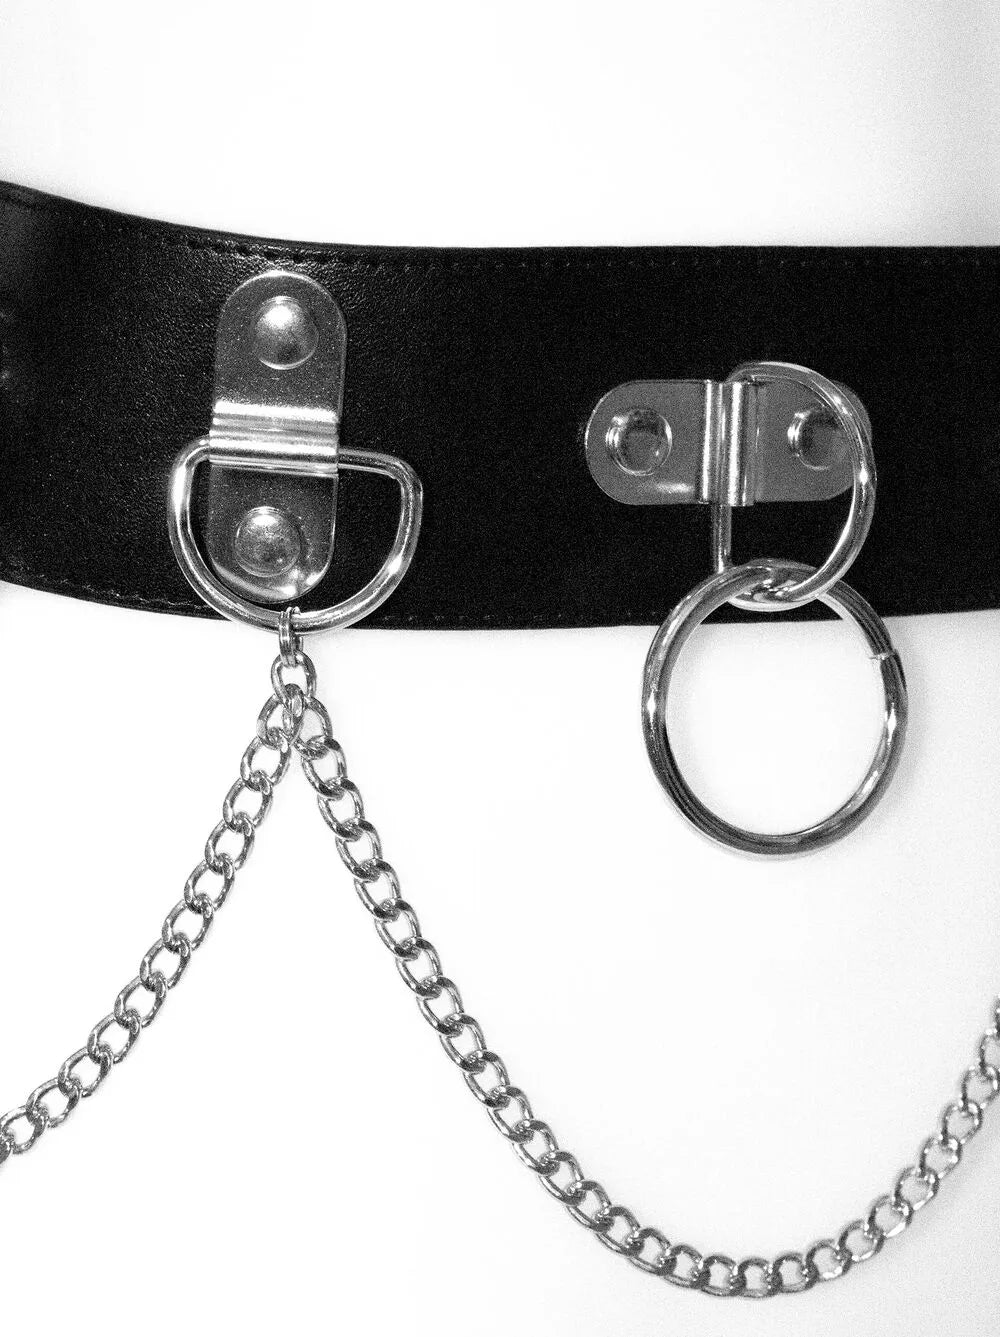 Bondage Belt with Link and Chain Detail